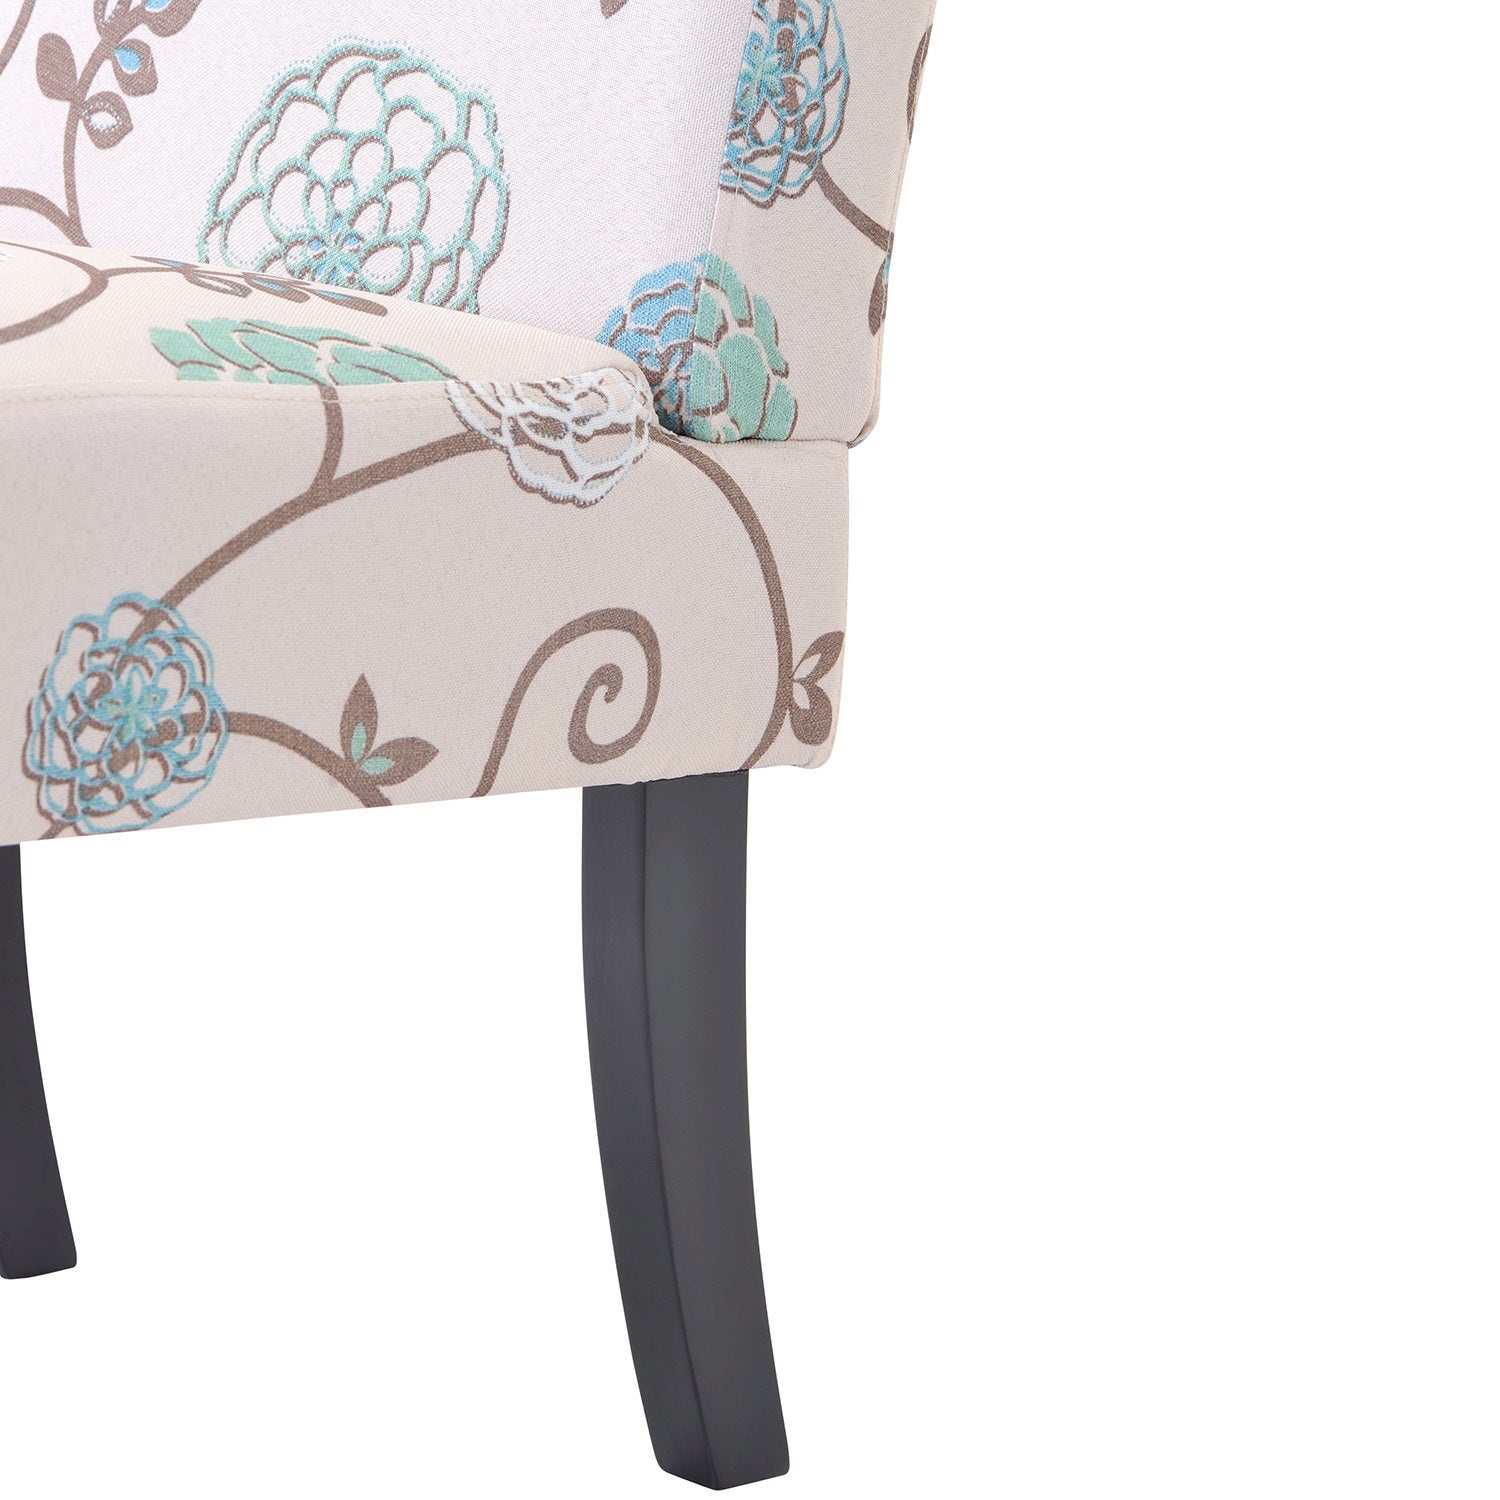 Ivy Set of 2 Beige Floral Pattern Accent Chairs